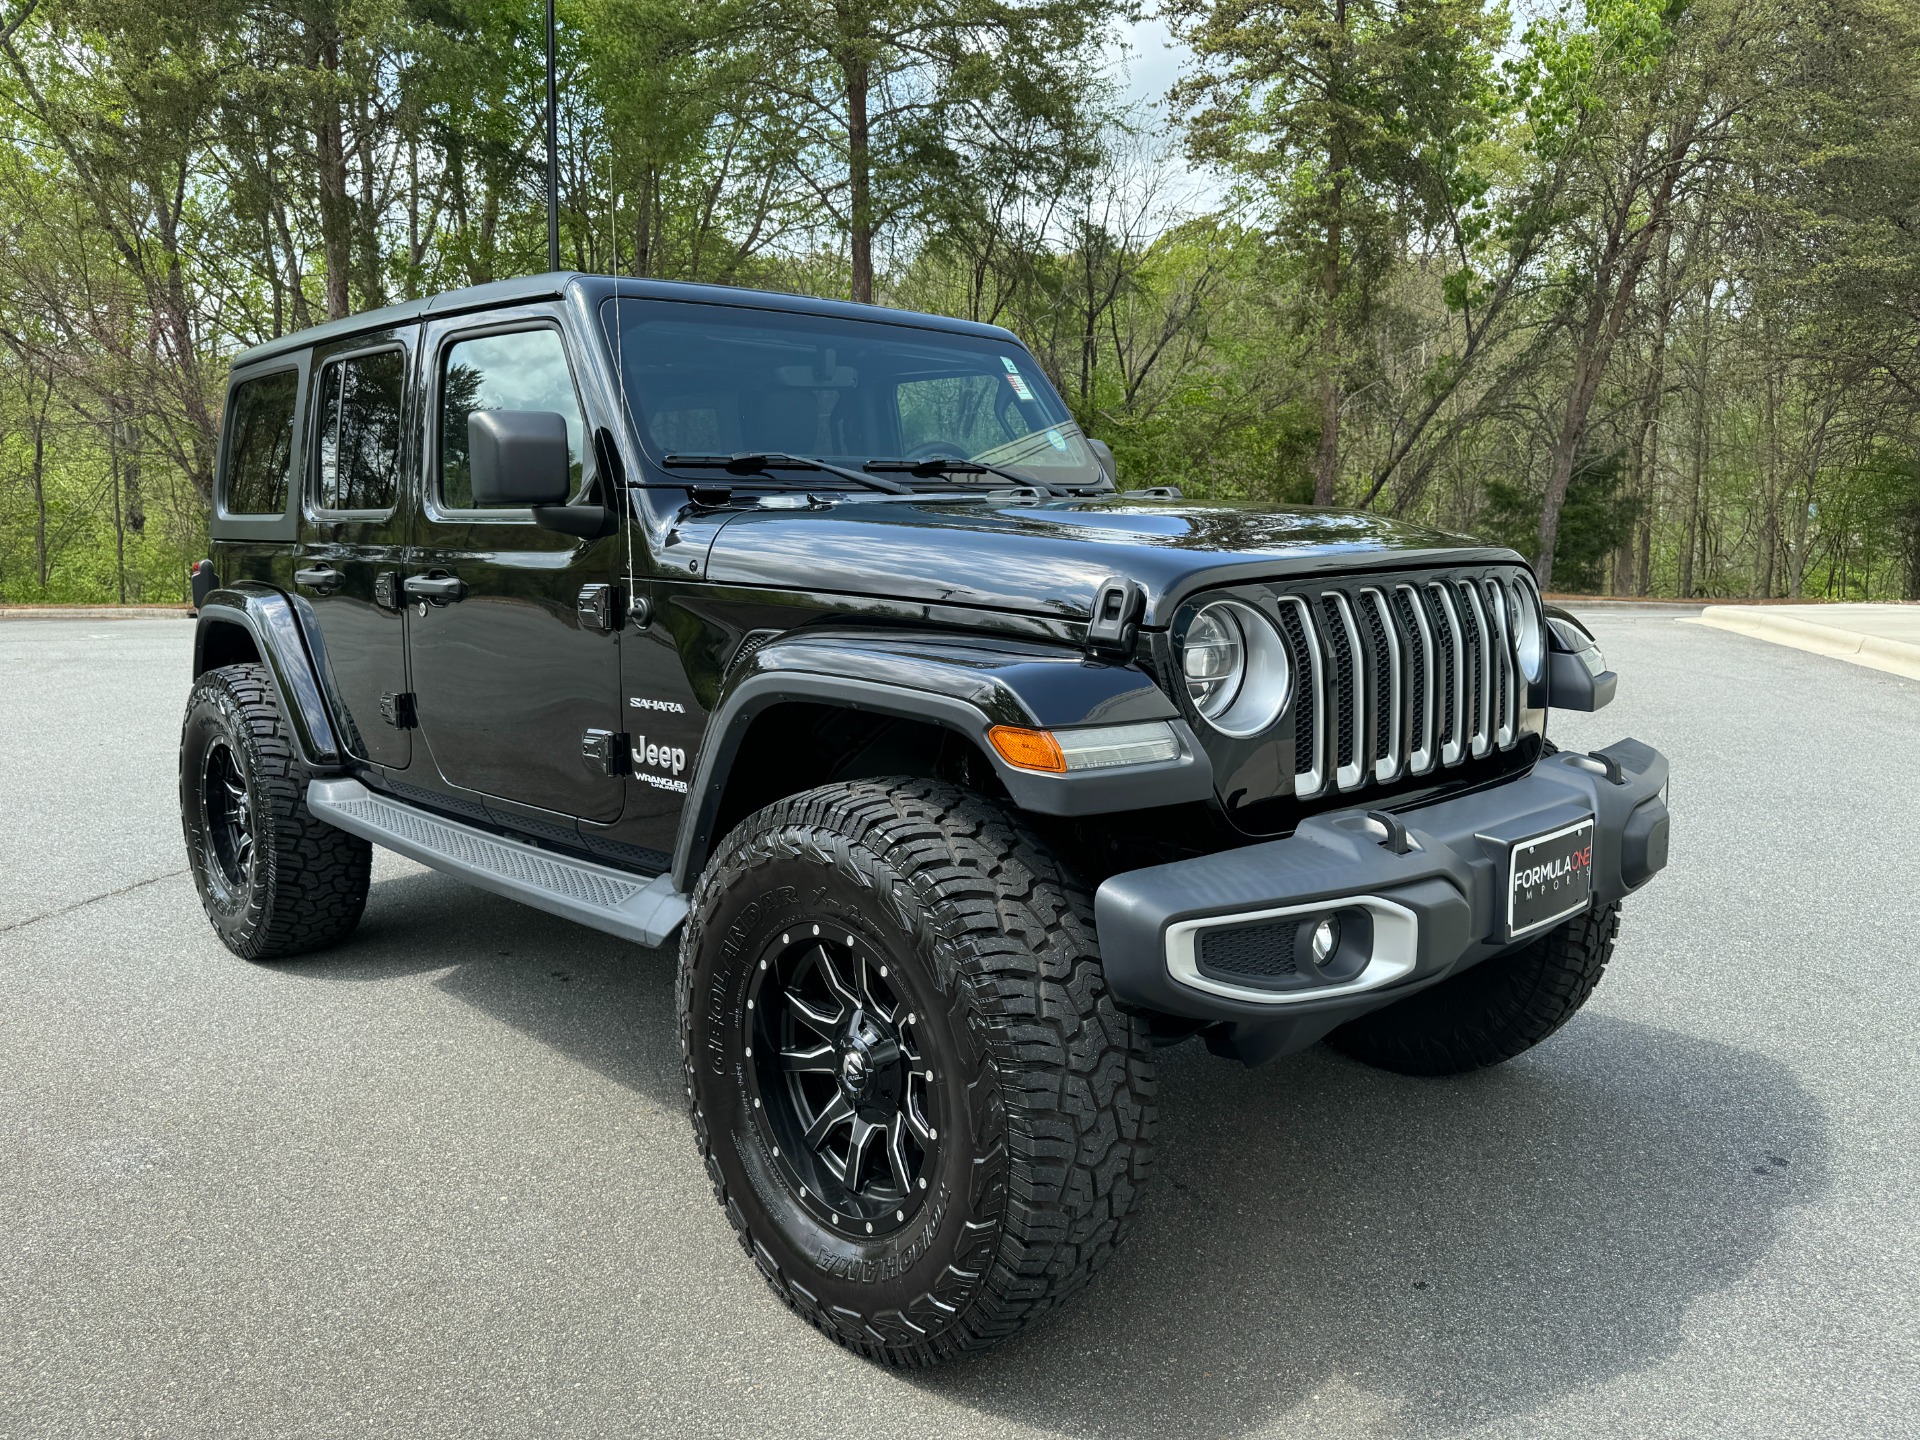 Used 2018 Jeep WRANGLER UNLIMITED SAHARA 4X4 / MANUAL / NAV / ALPINE / FREEDOM TOP / REARVIEW for sale Sold at Formula Imports in Charlotte NC 28227 16